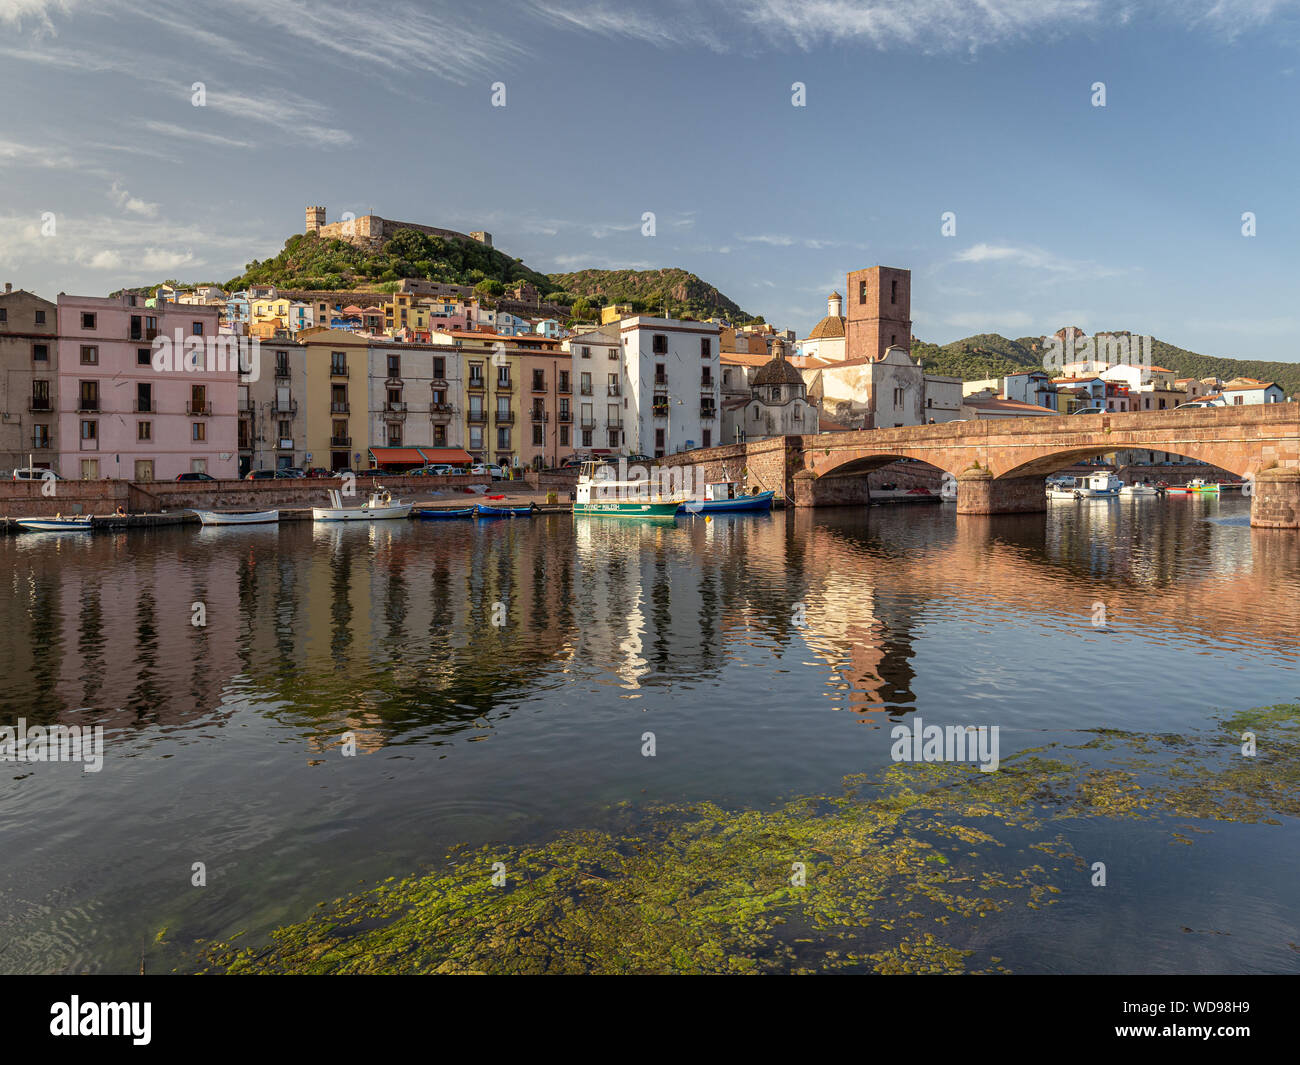 Medieval town Bosa during sunset. Bridge and colorful houses reflected in Temo river. Castle over the city Stock Photo